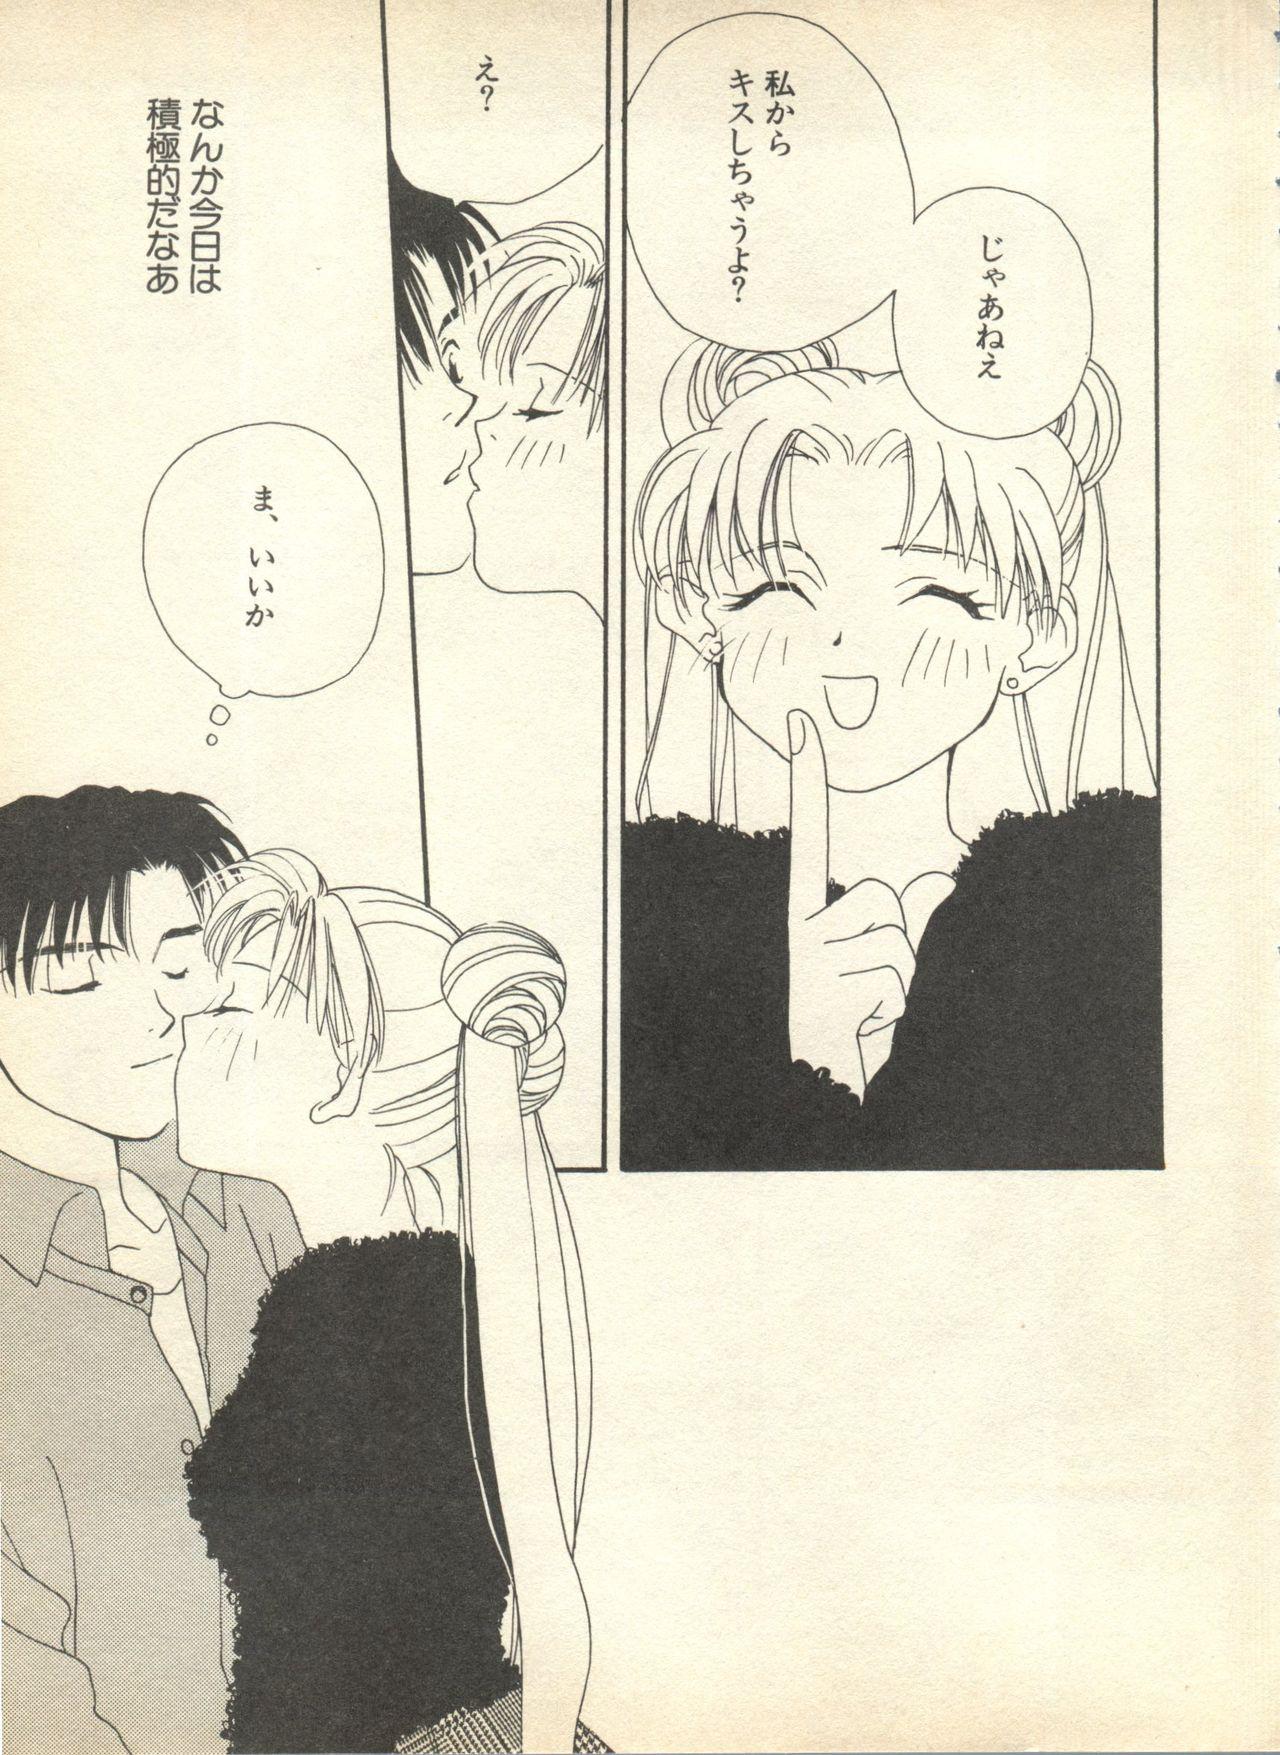 Penis Lunatic Party 9 - Sailor moon Cruising - Page 6